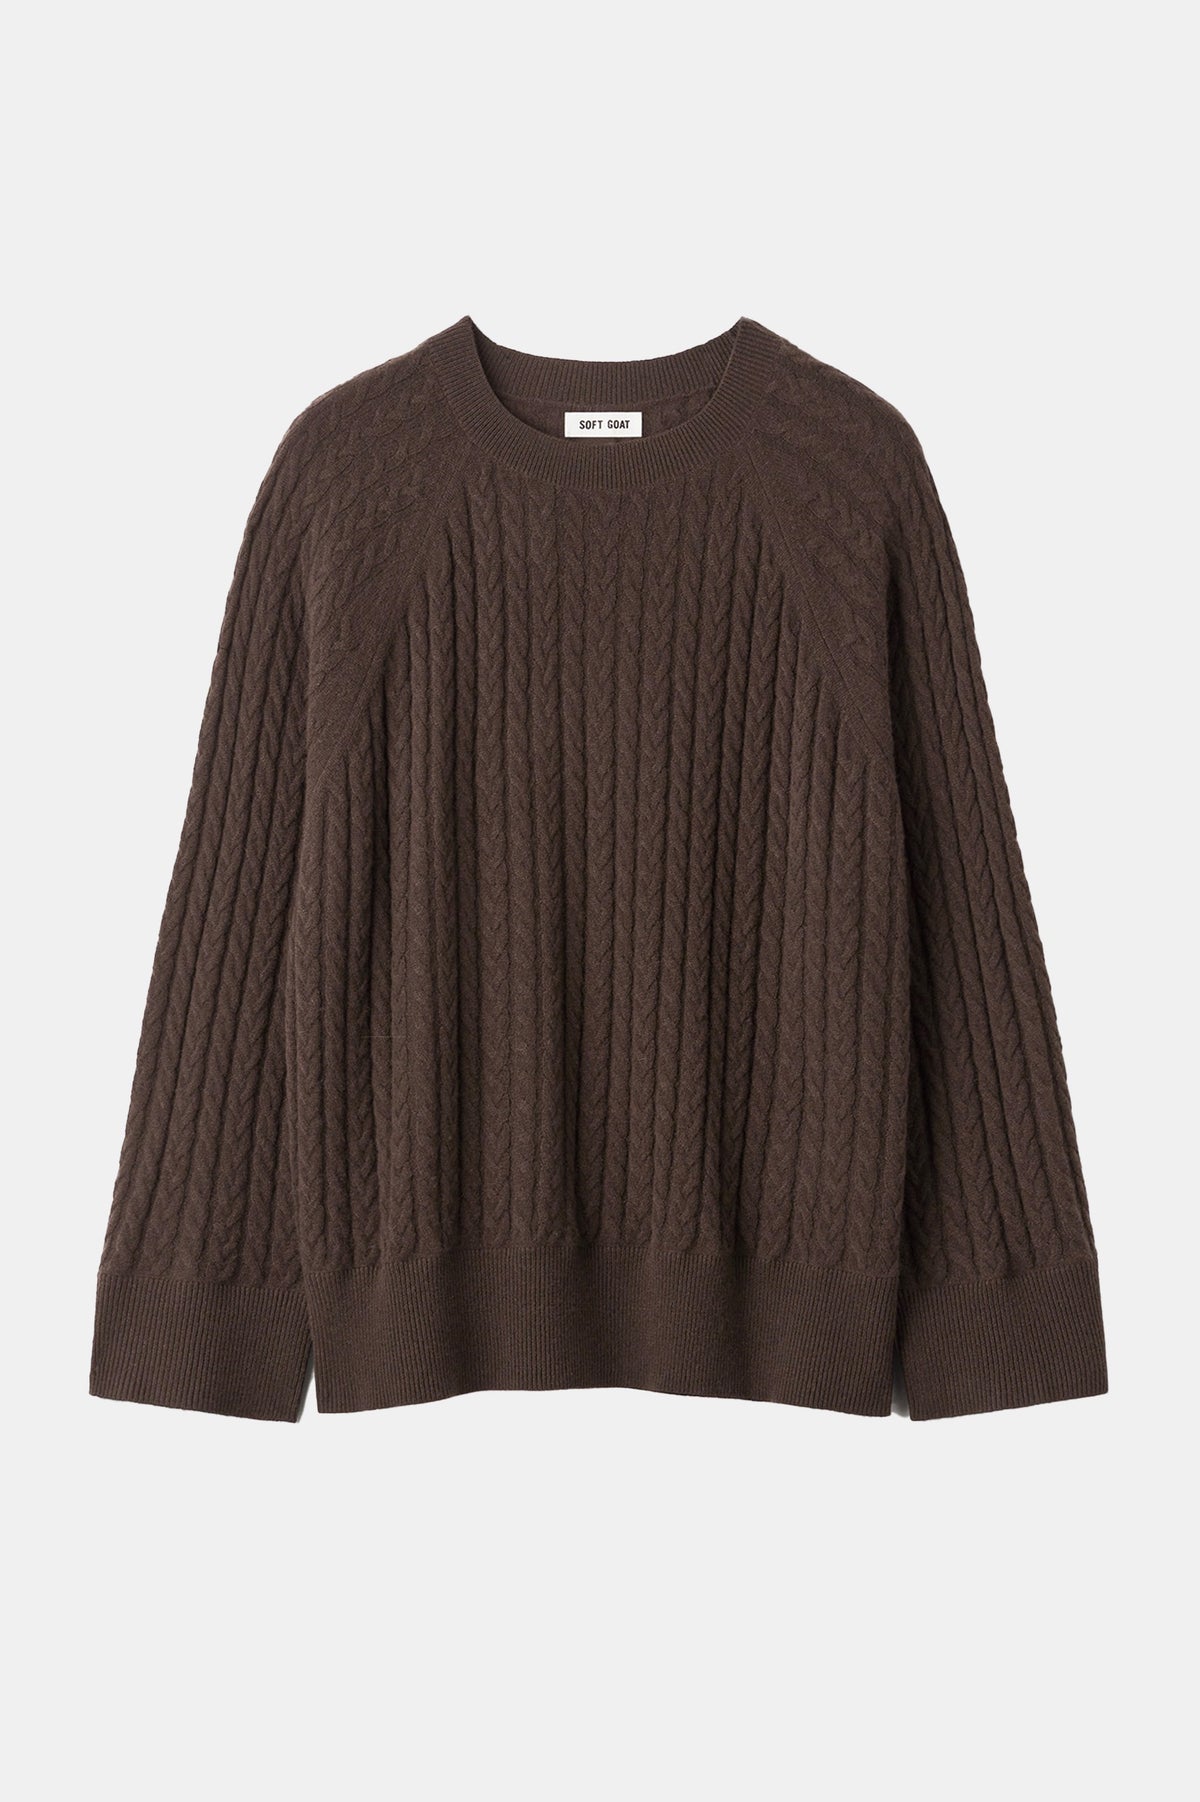 Oversized Cable Cashmere Sweater in Chocolate